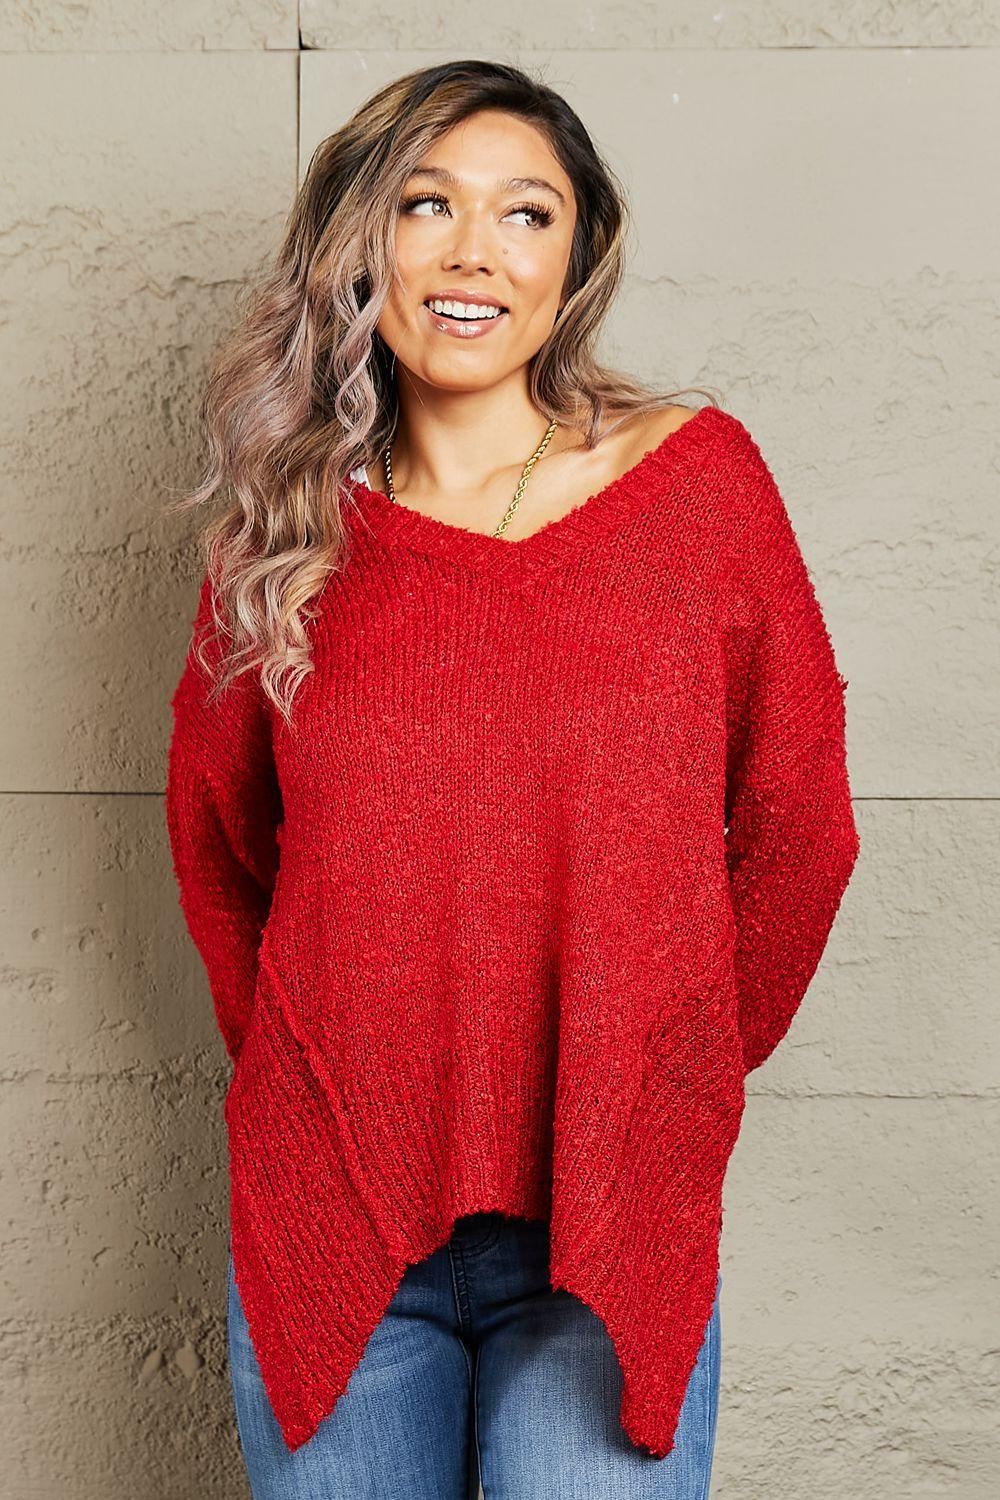 Sweater - Red Draped Detail Long Sleeve - Inspired Eye Boutique